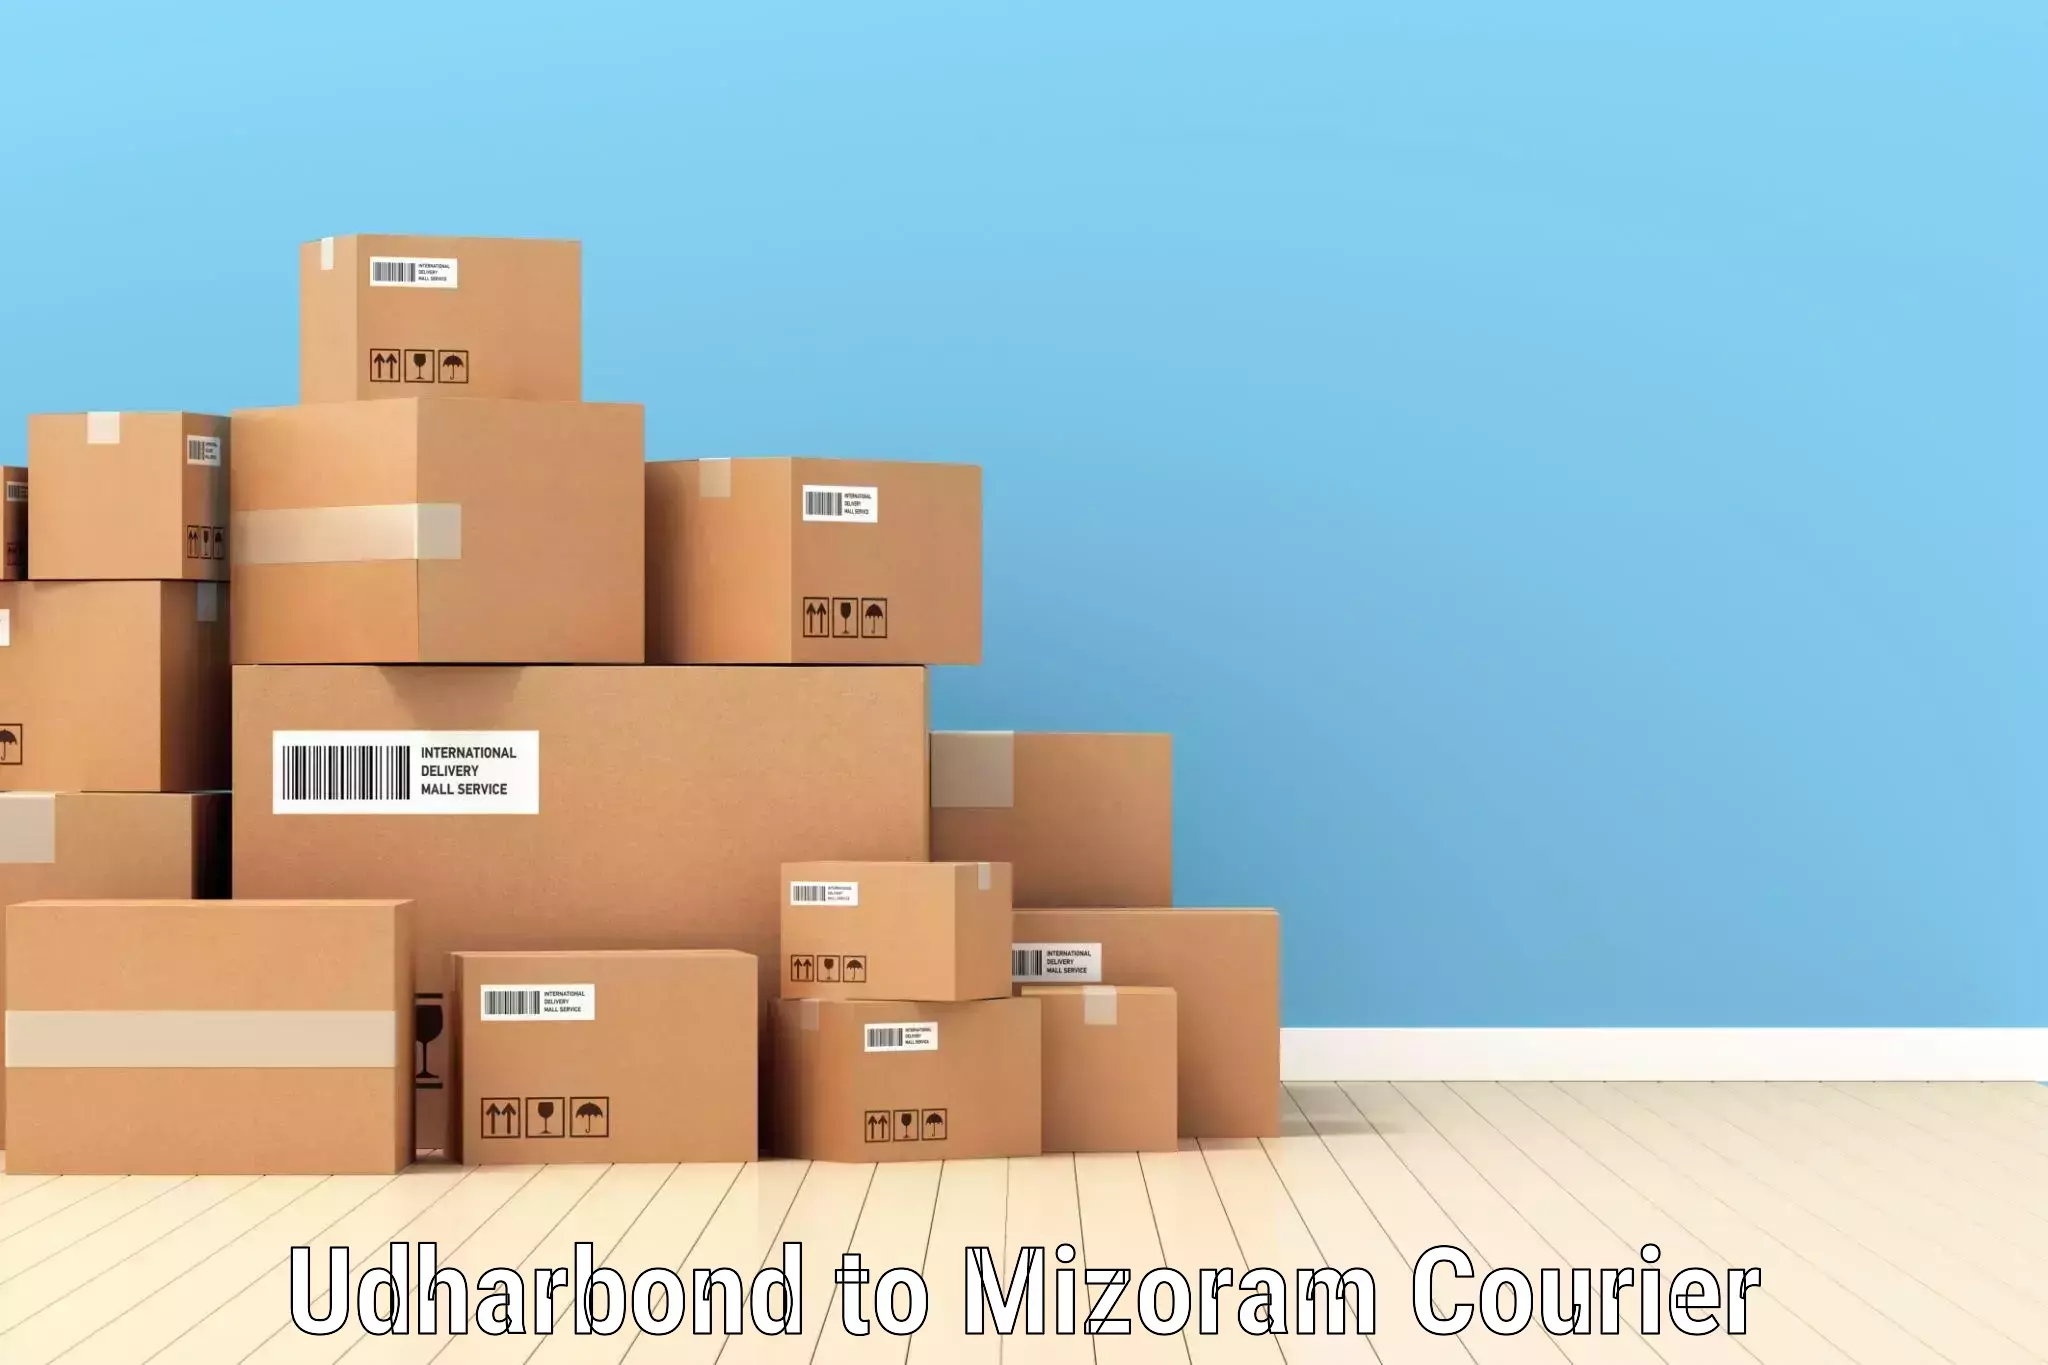 Special handling courier in Udharbond to Mizoram